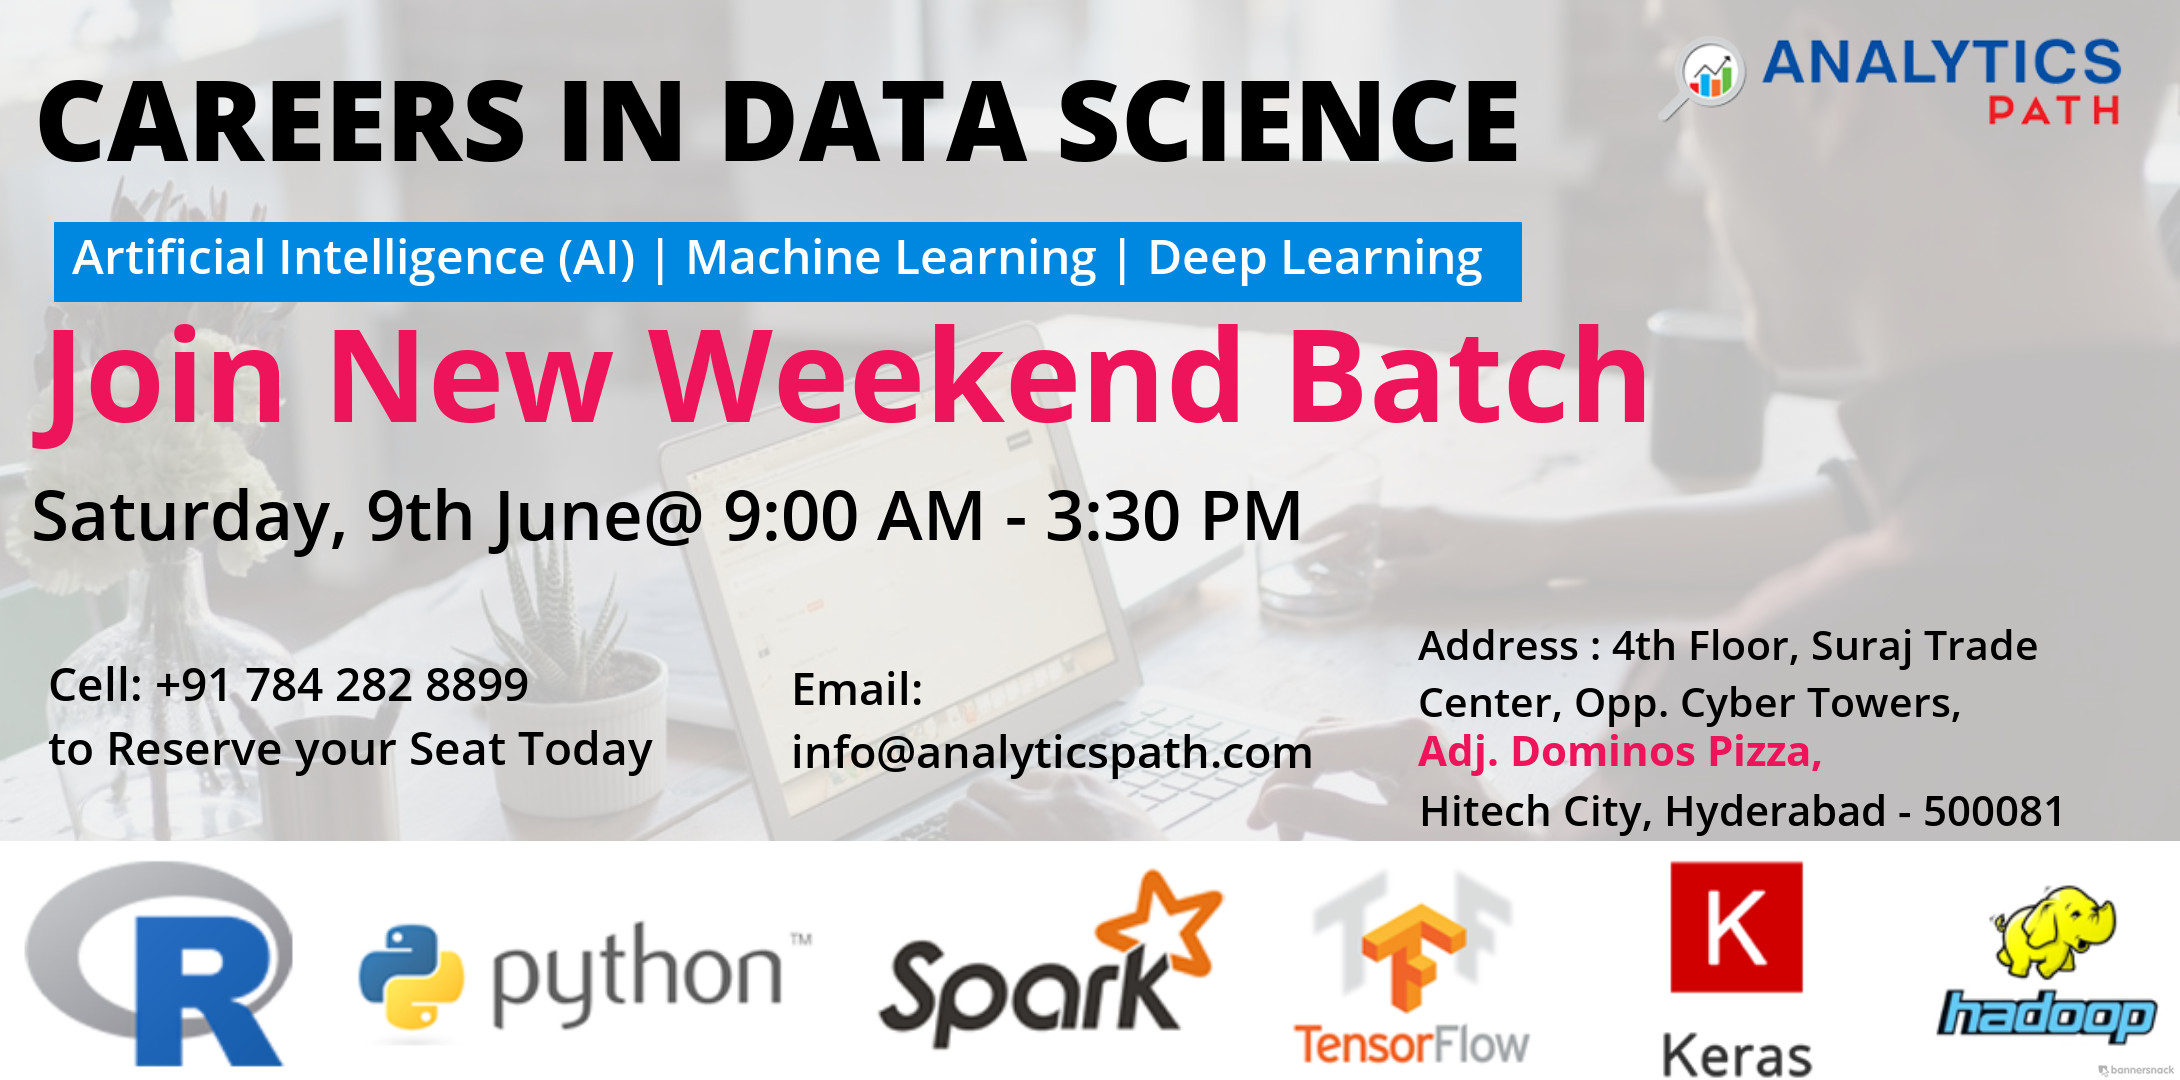 Enrolment Is Underway For A New Weekend Batch On Data Science, Hyderabad, Telangana, India